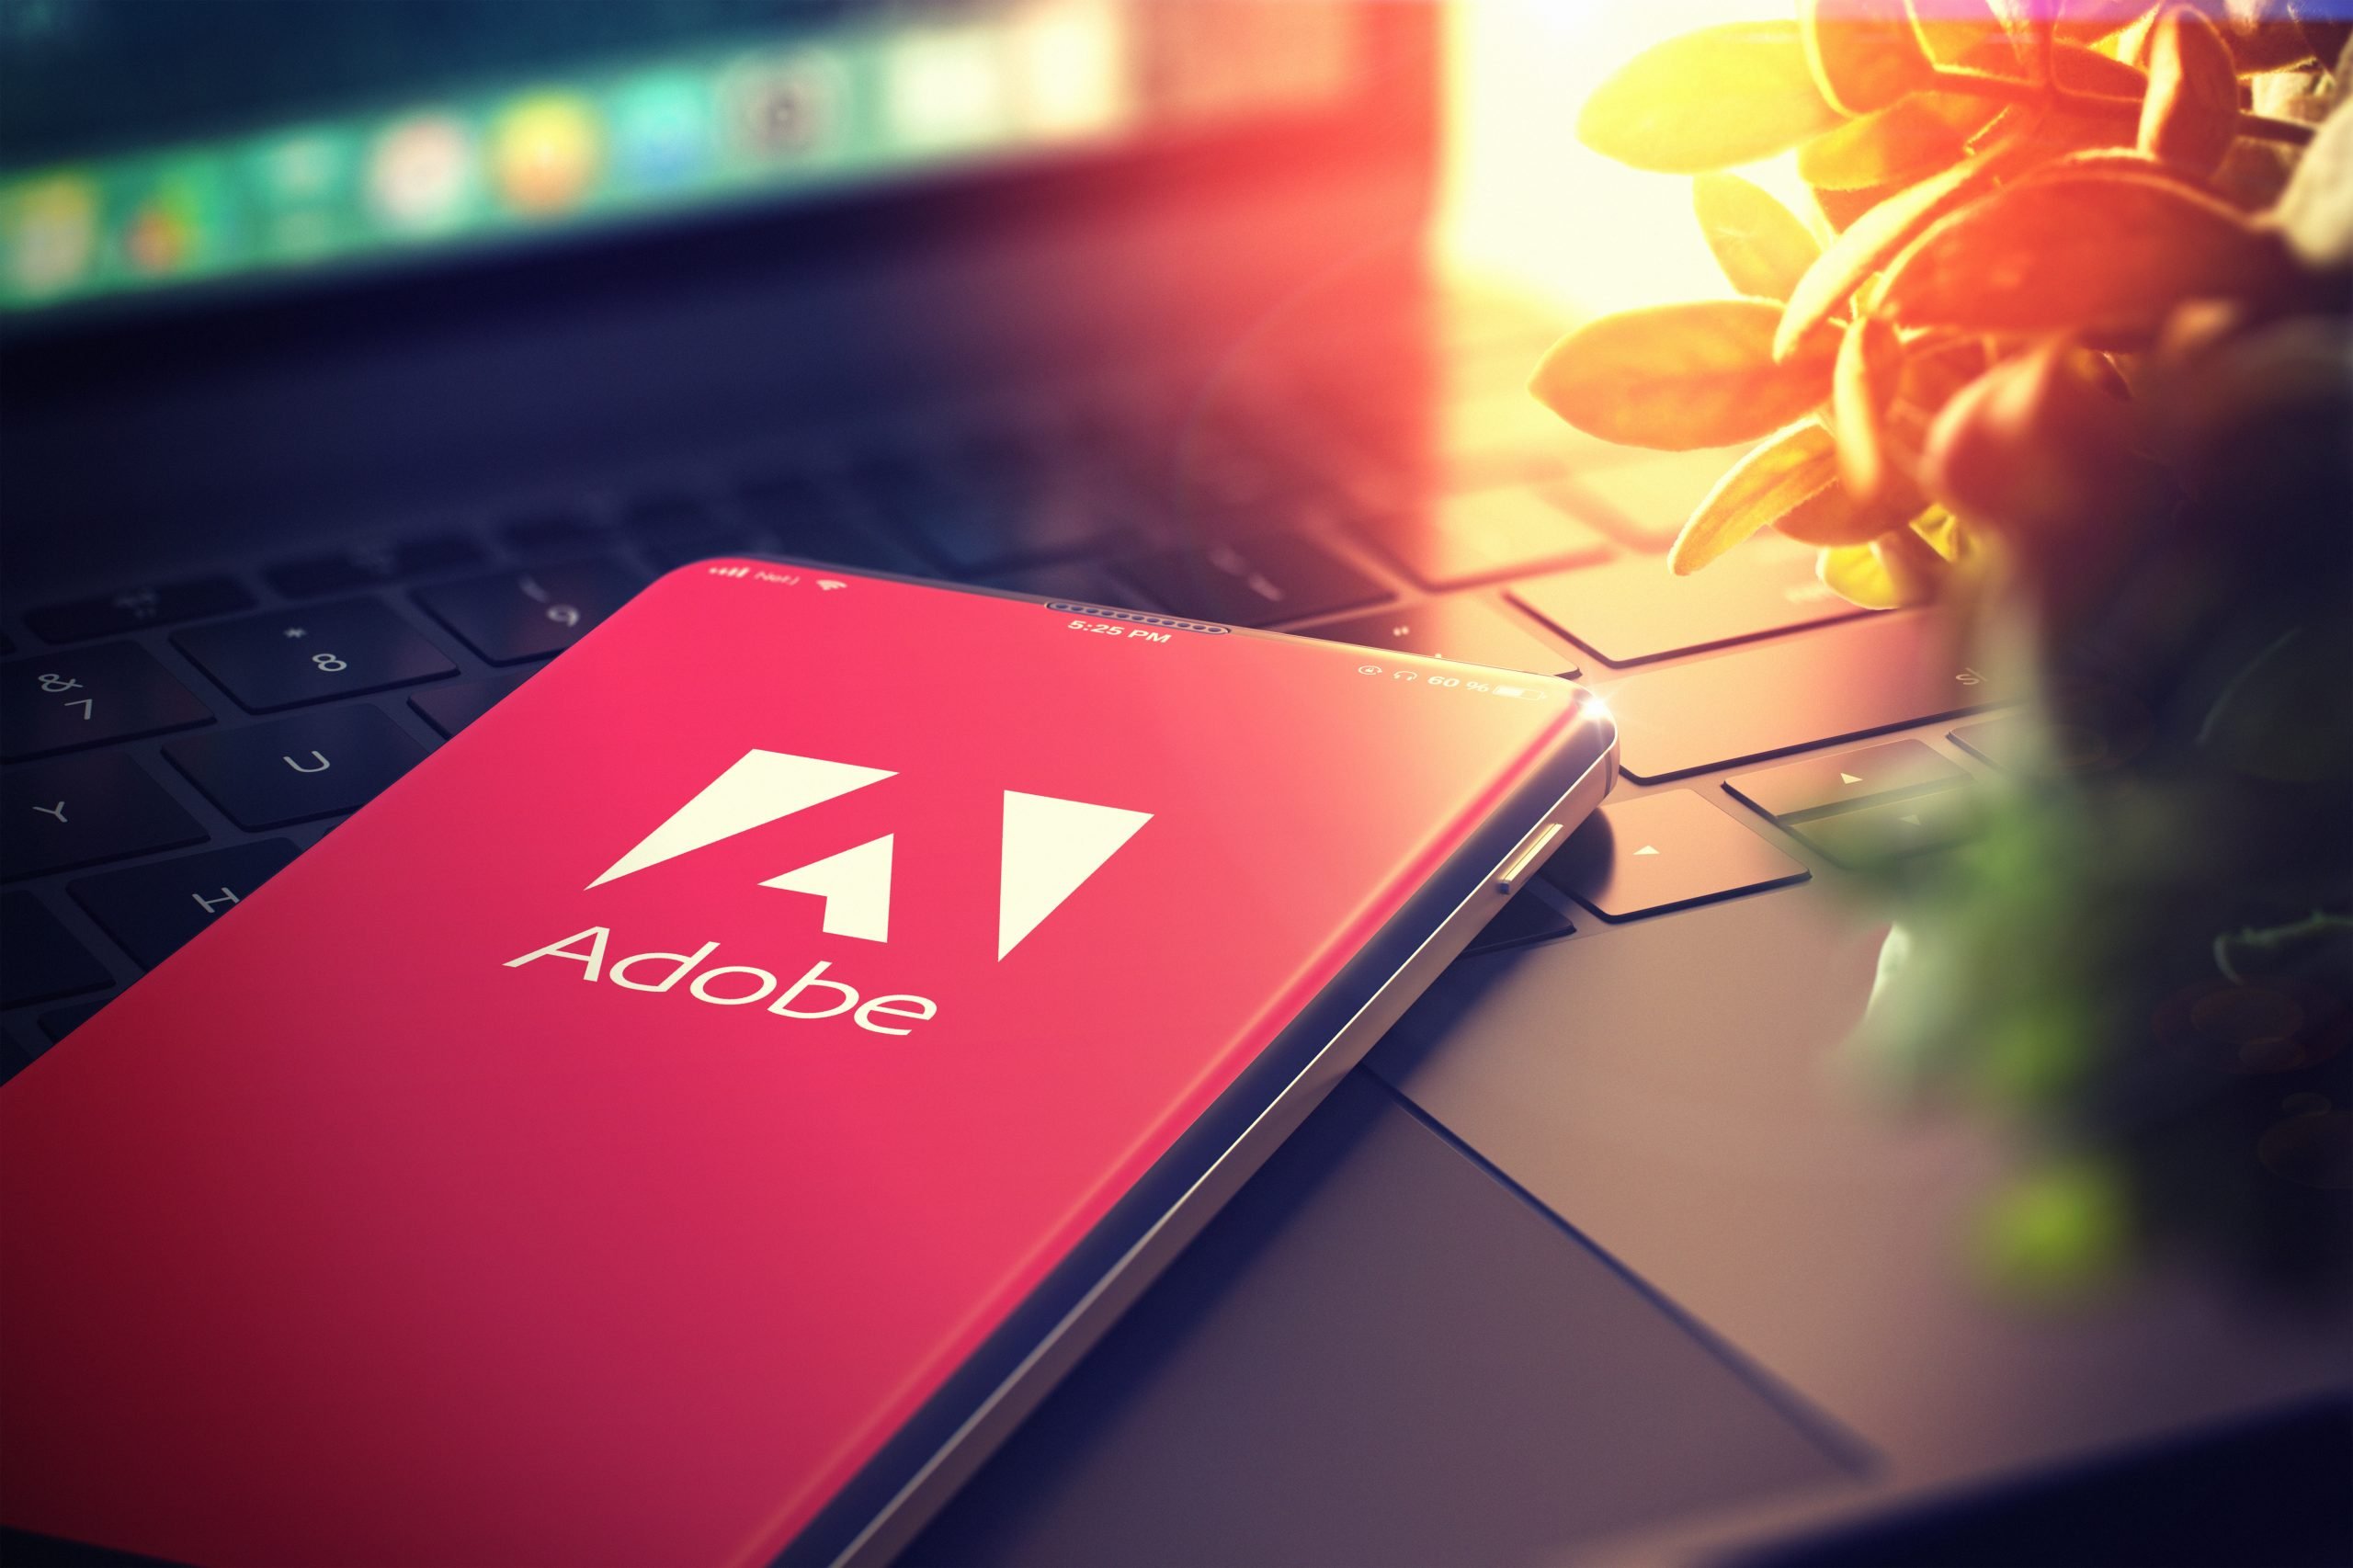 The FTC is Onto Adobe’s Shady Business Practices